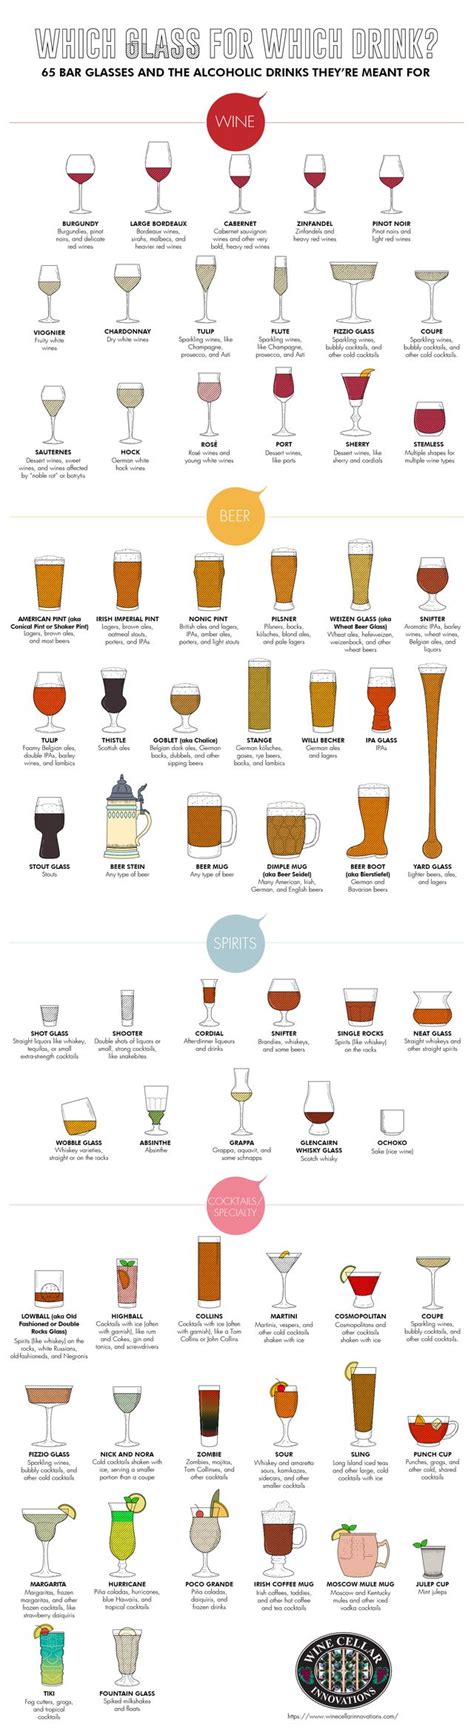 65 Bar Glasses And The Alcoholic Drinks They Re Meant For Cocktails In 2020 Alcoholic Drinks